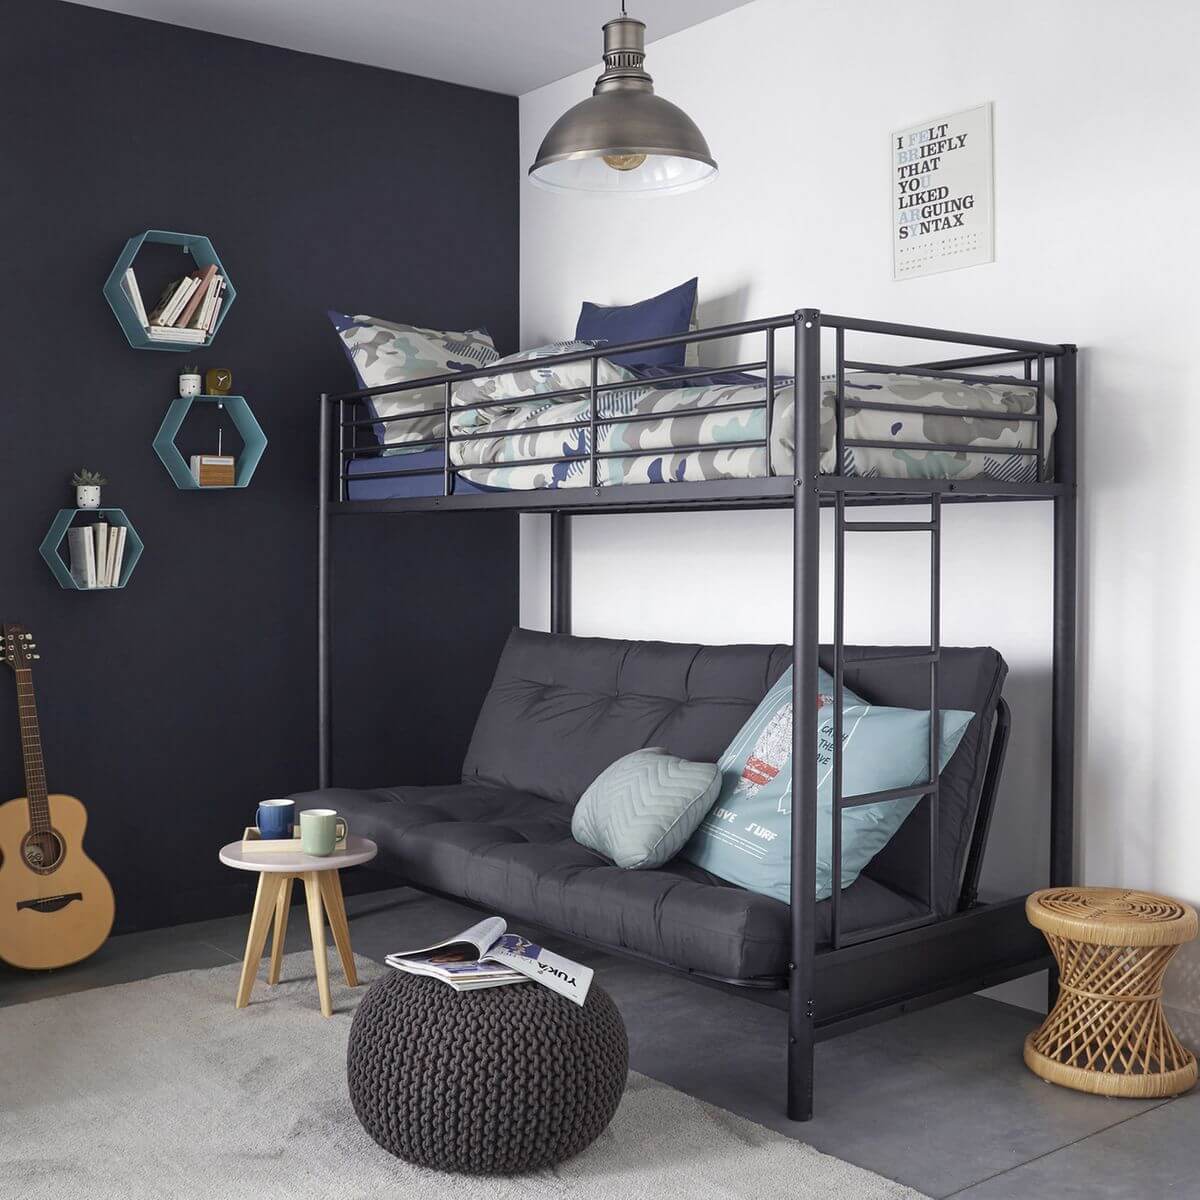 Shared bedroom, create a space for each occupant (1)